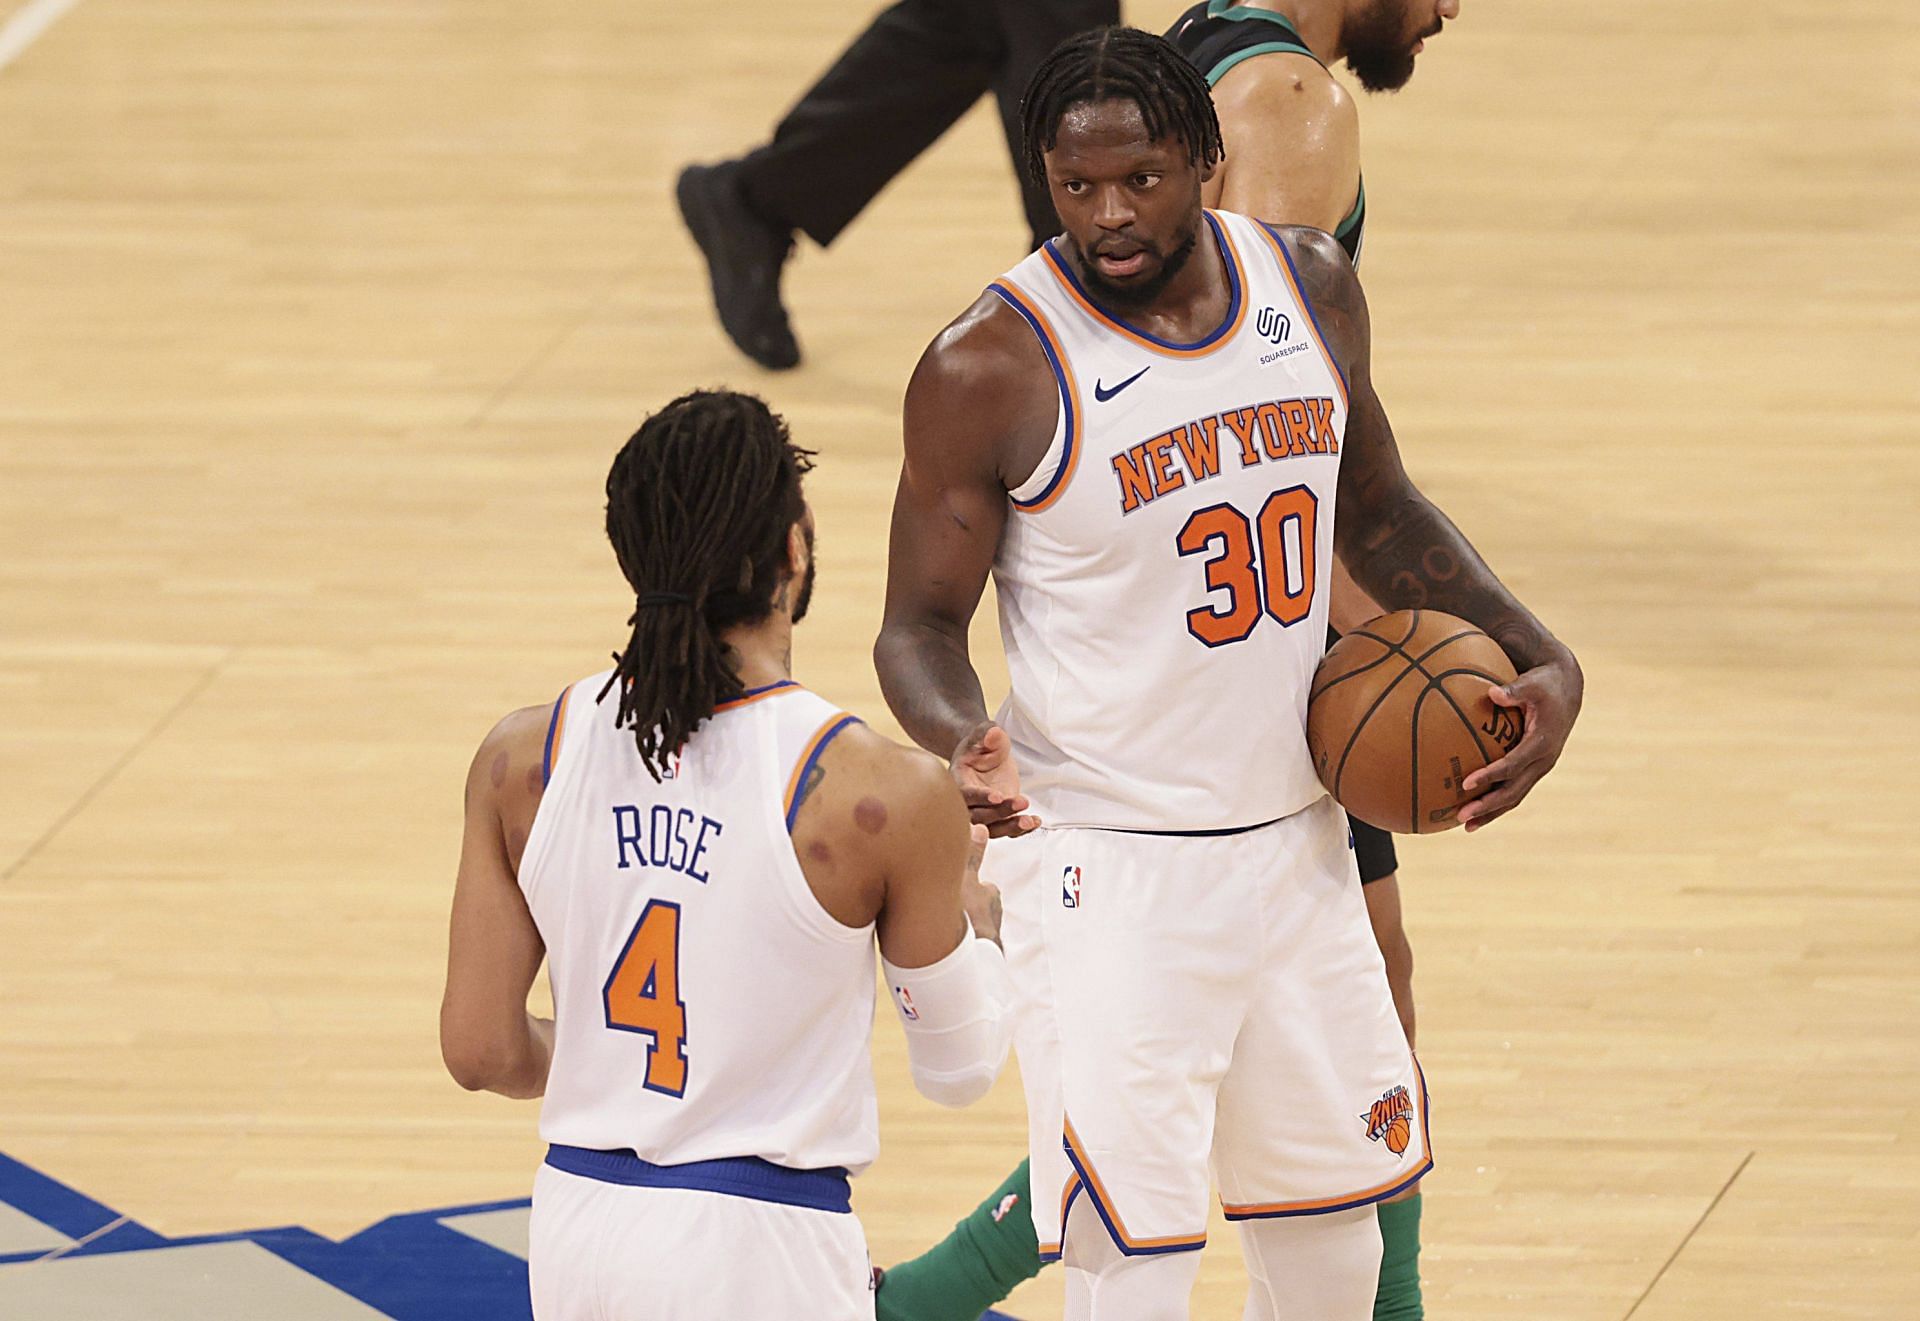 The New York Knicks have been erratic playing on their home court this season [Photo: Bleacher Report]